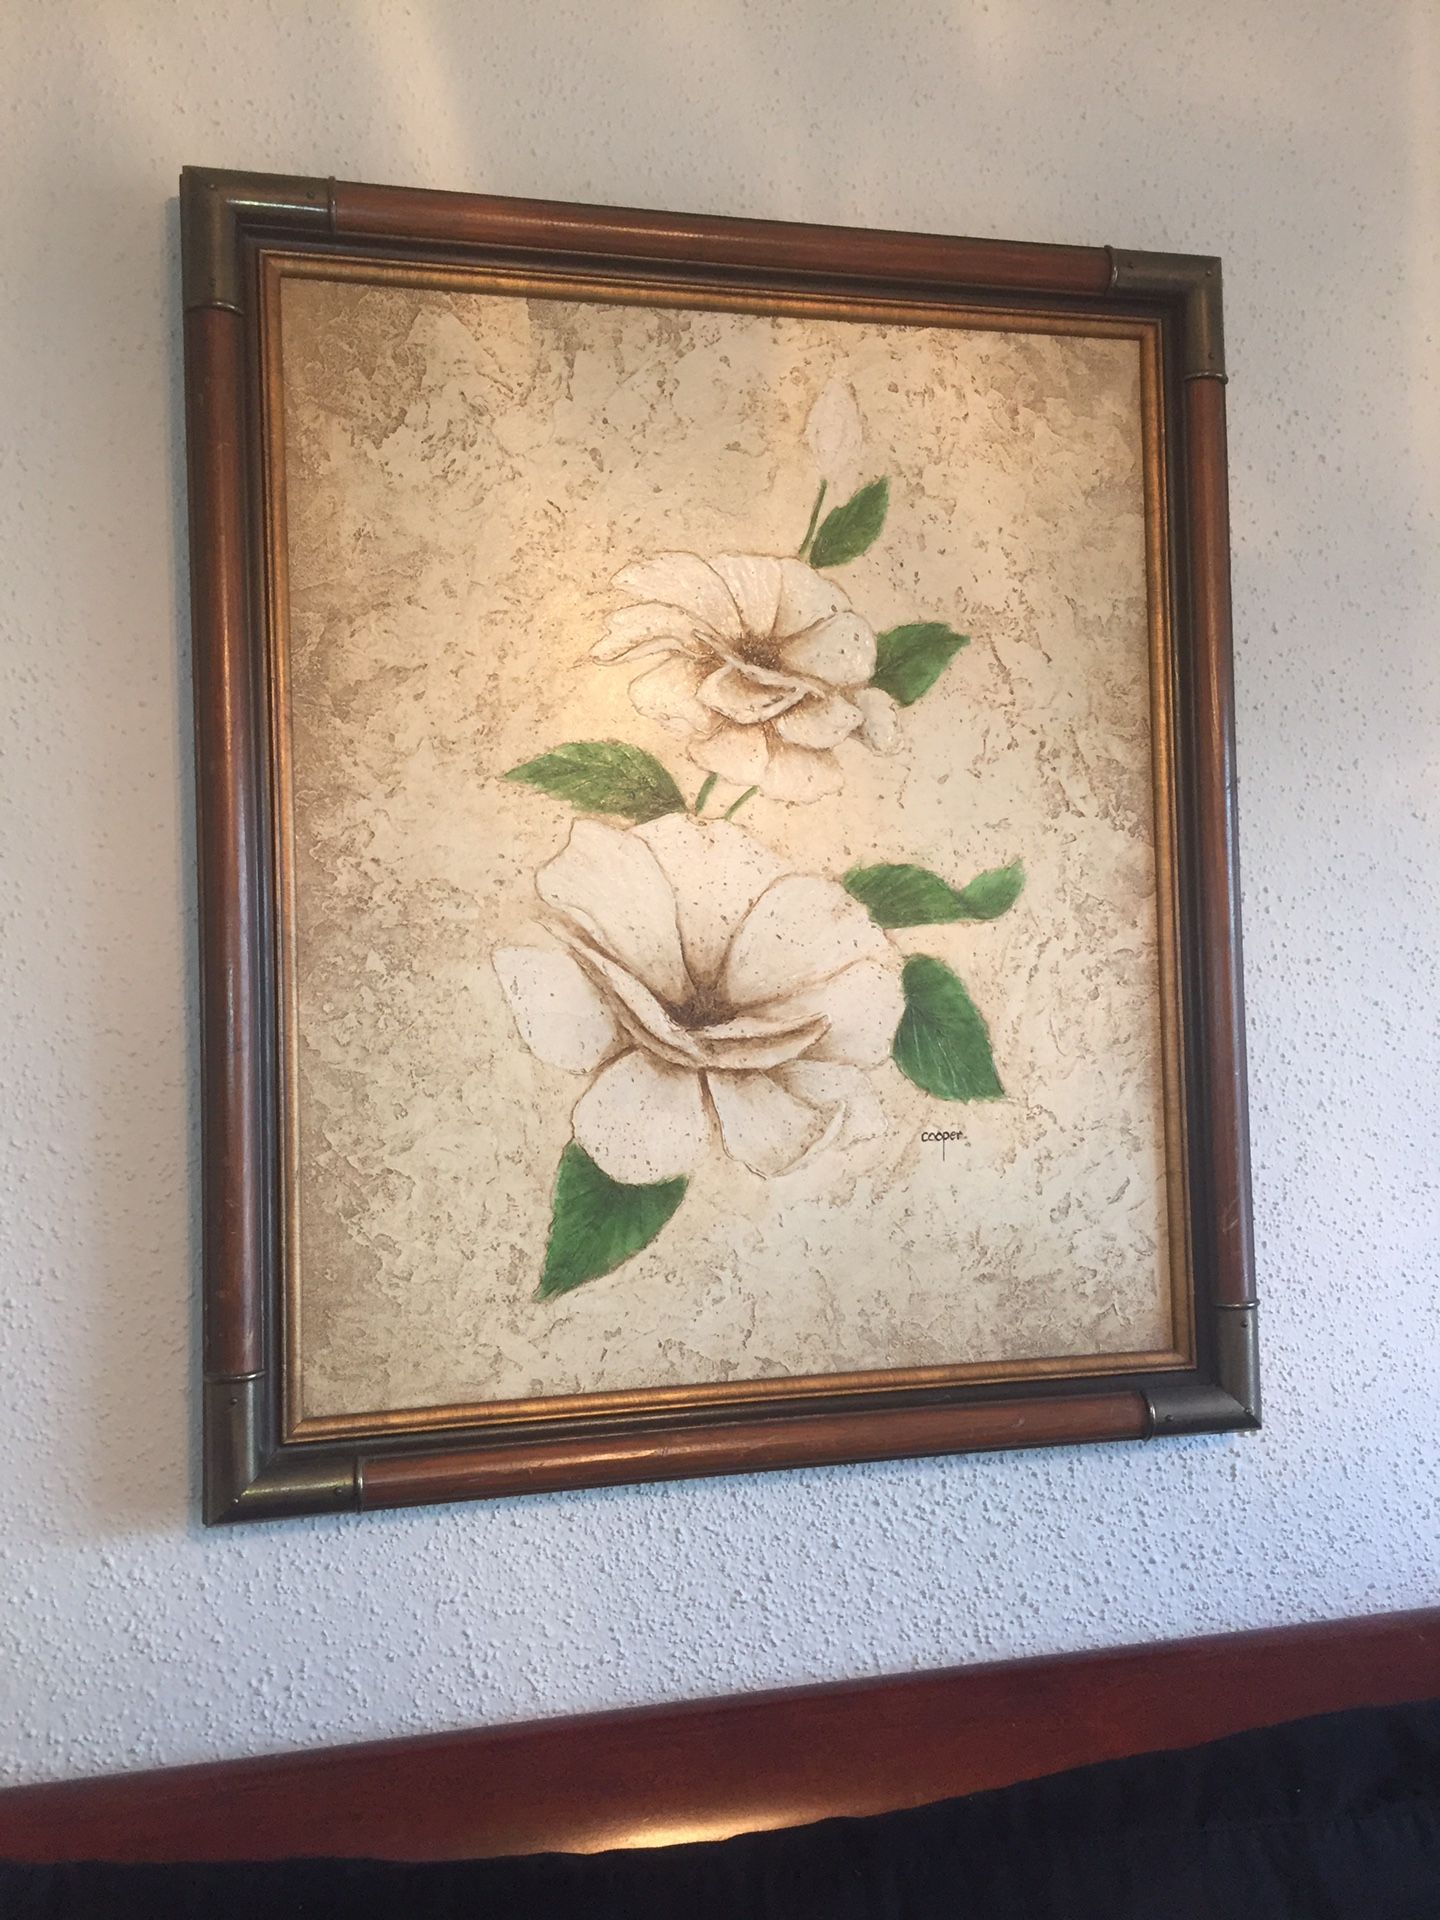 “Magnolias” painting by Cooper